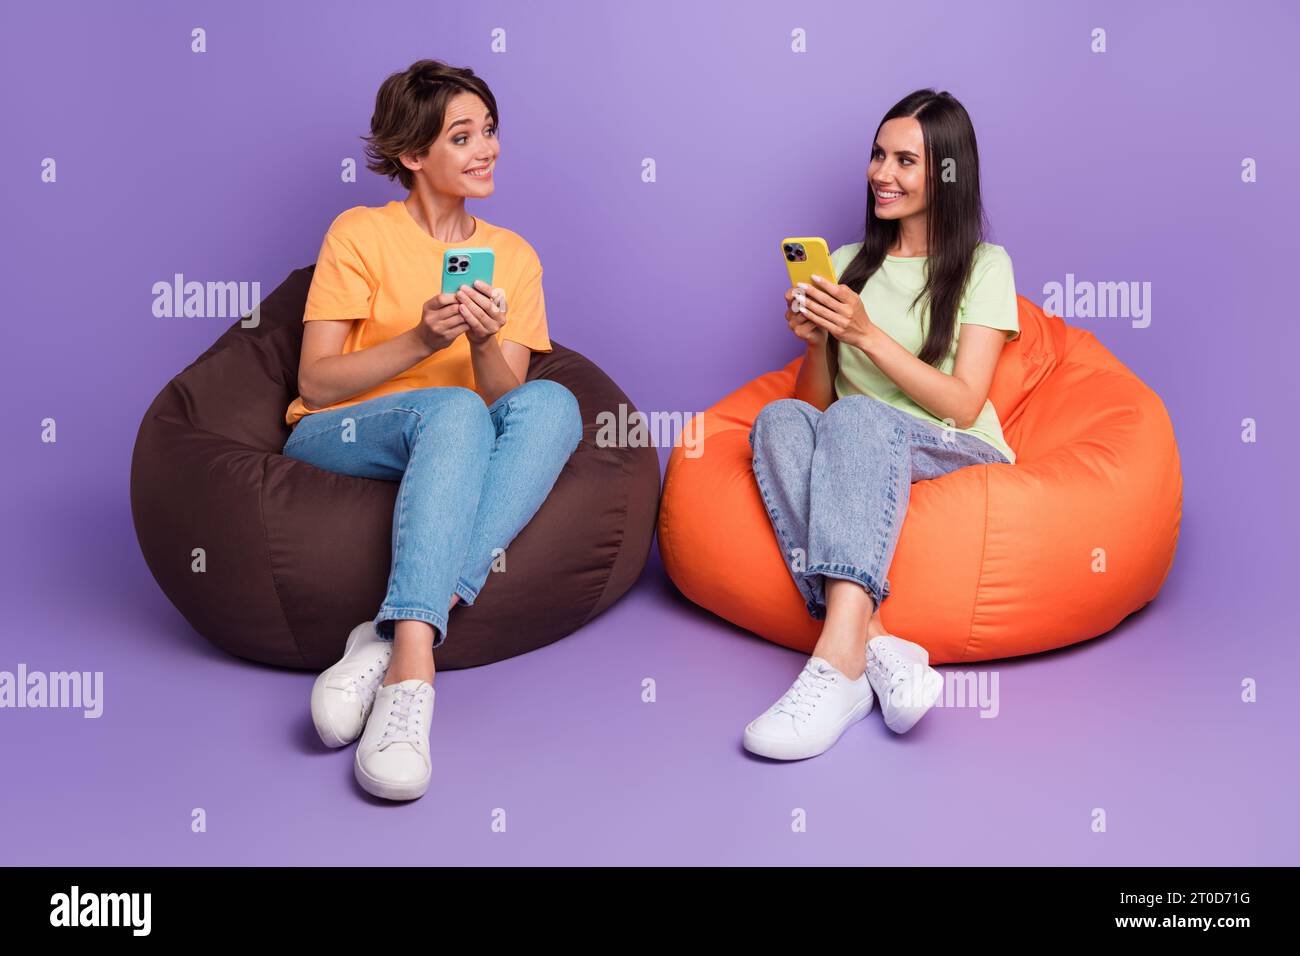 Full body length photo of sit beanbag friendship two girls using their iphones together communicating isolated on purple color background Stock Photo